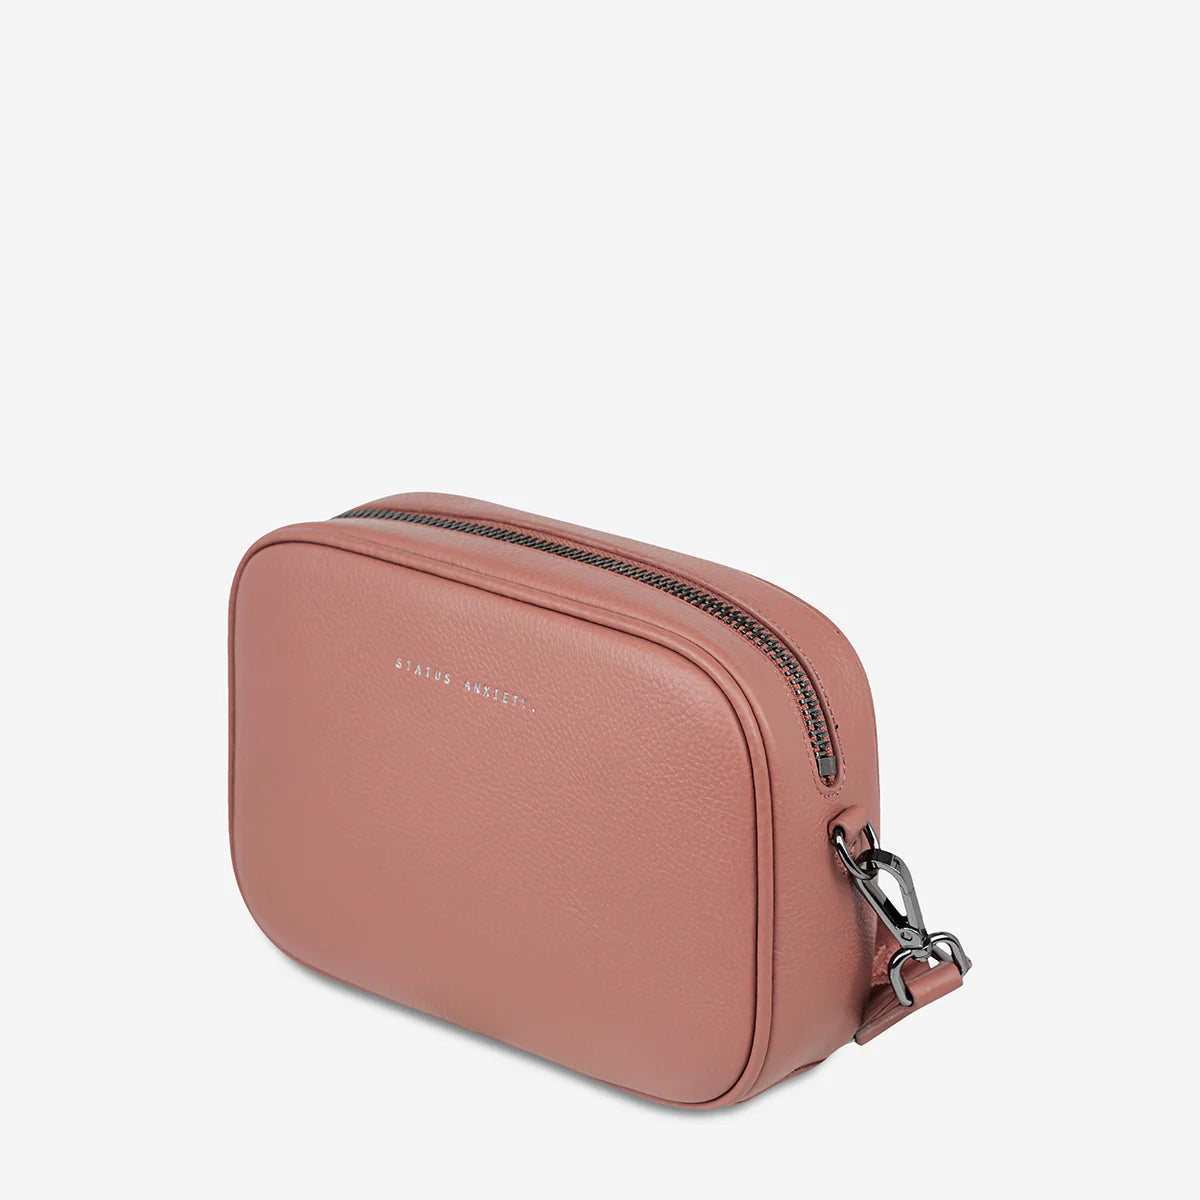 Status anxiety plunder with webbed strap - dusty rose